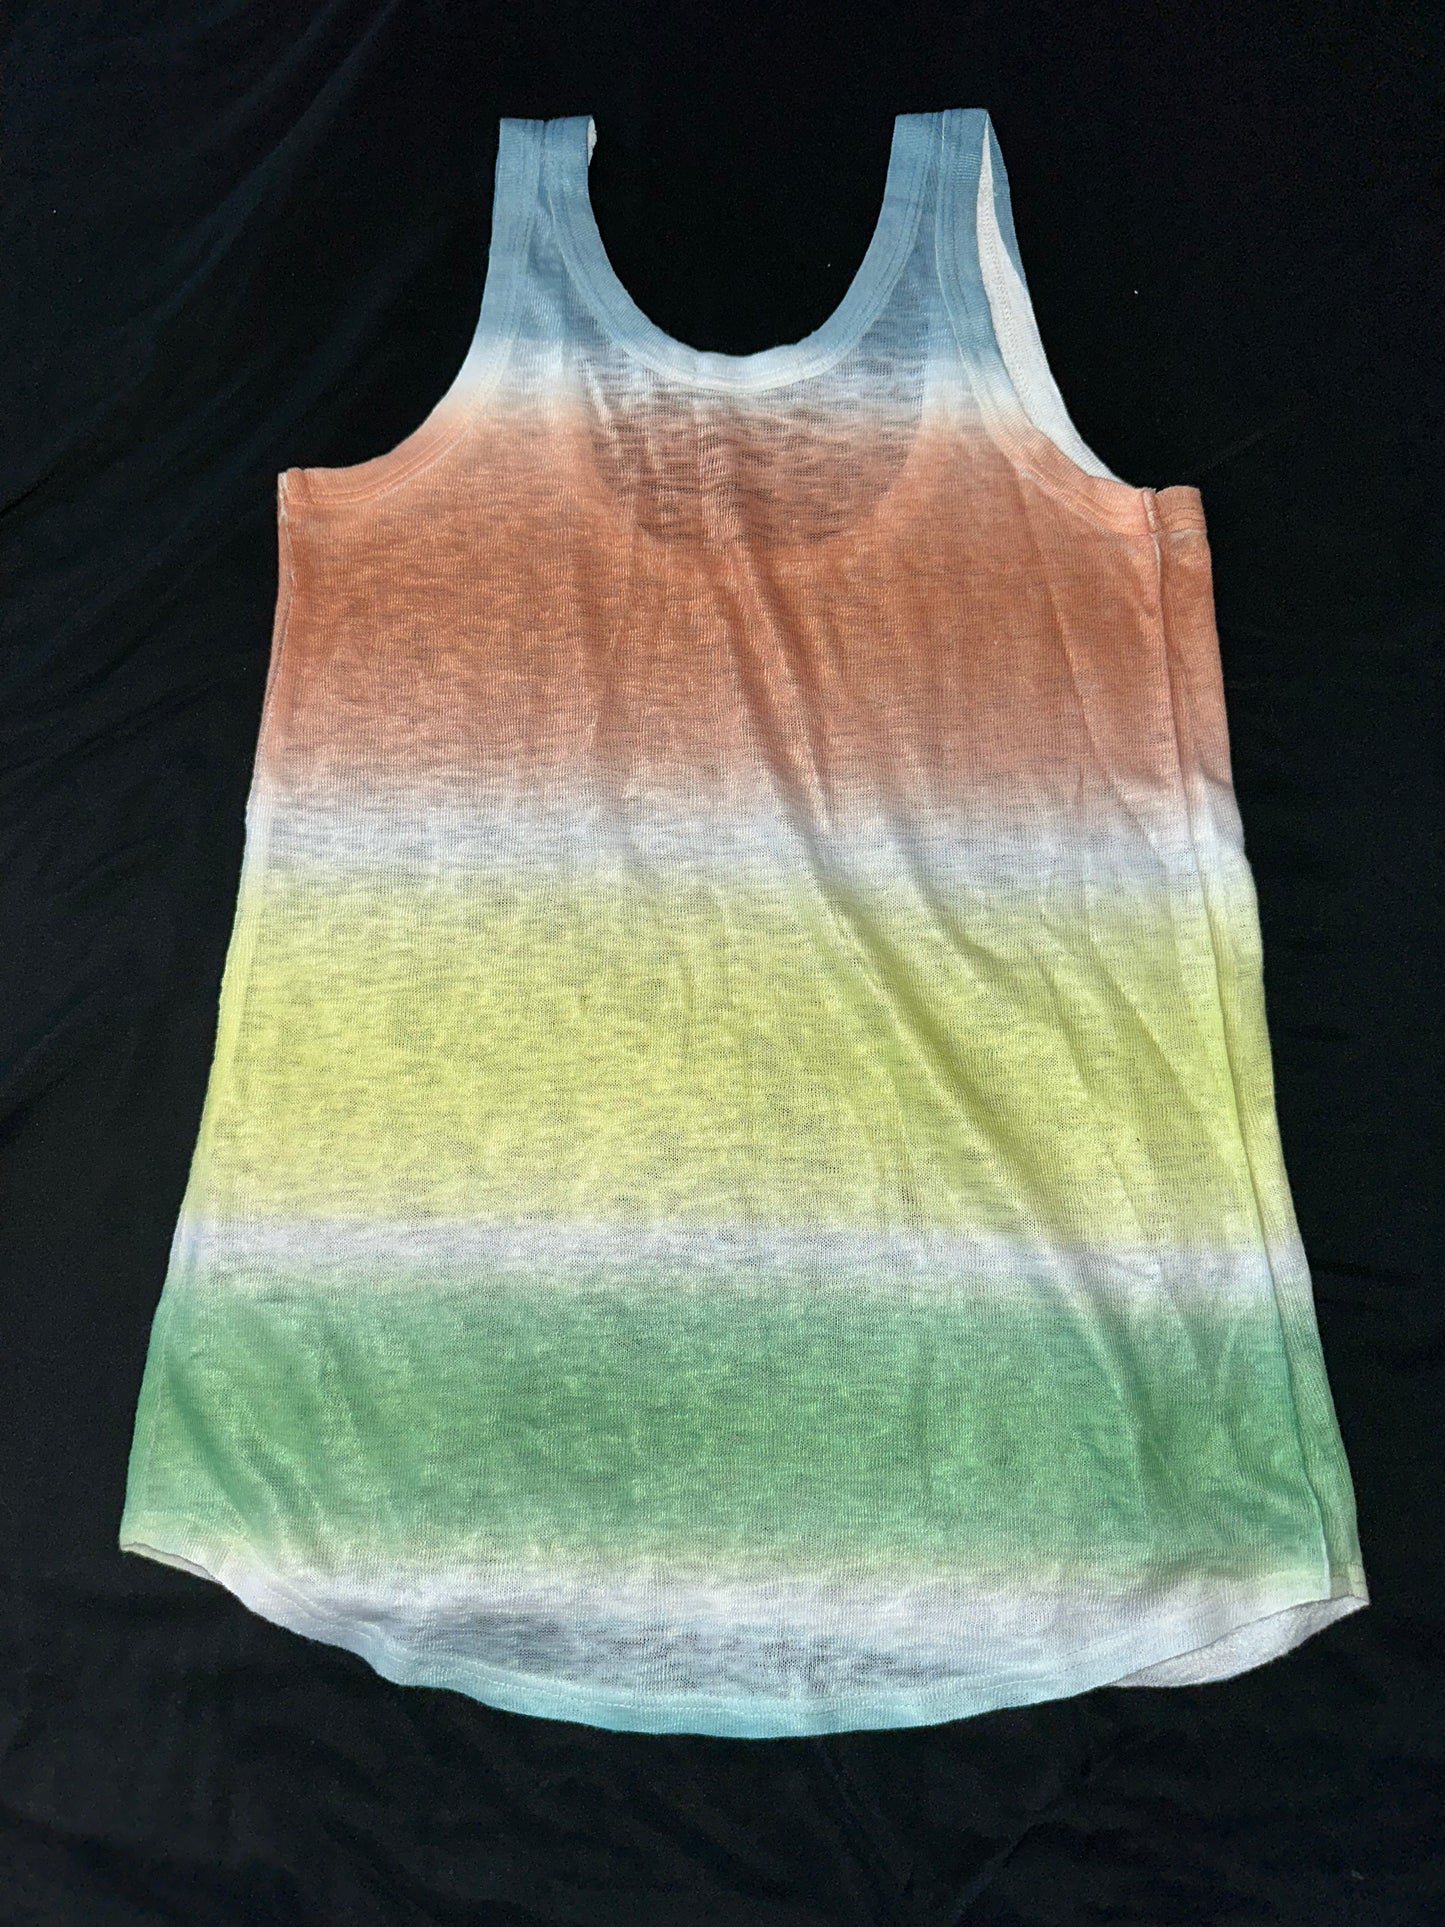 Dip-Dye Bling Tank top with CALI ALL DAY design (Clear)